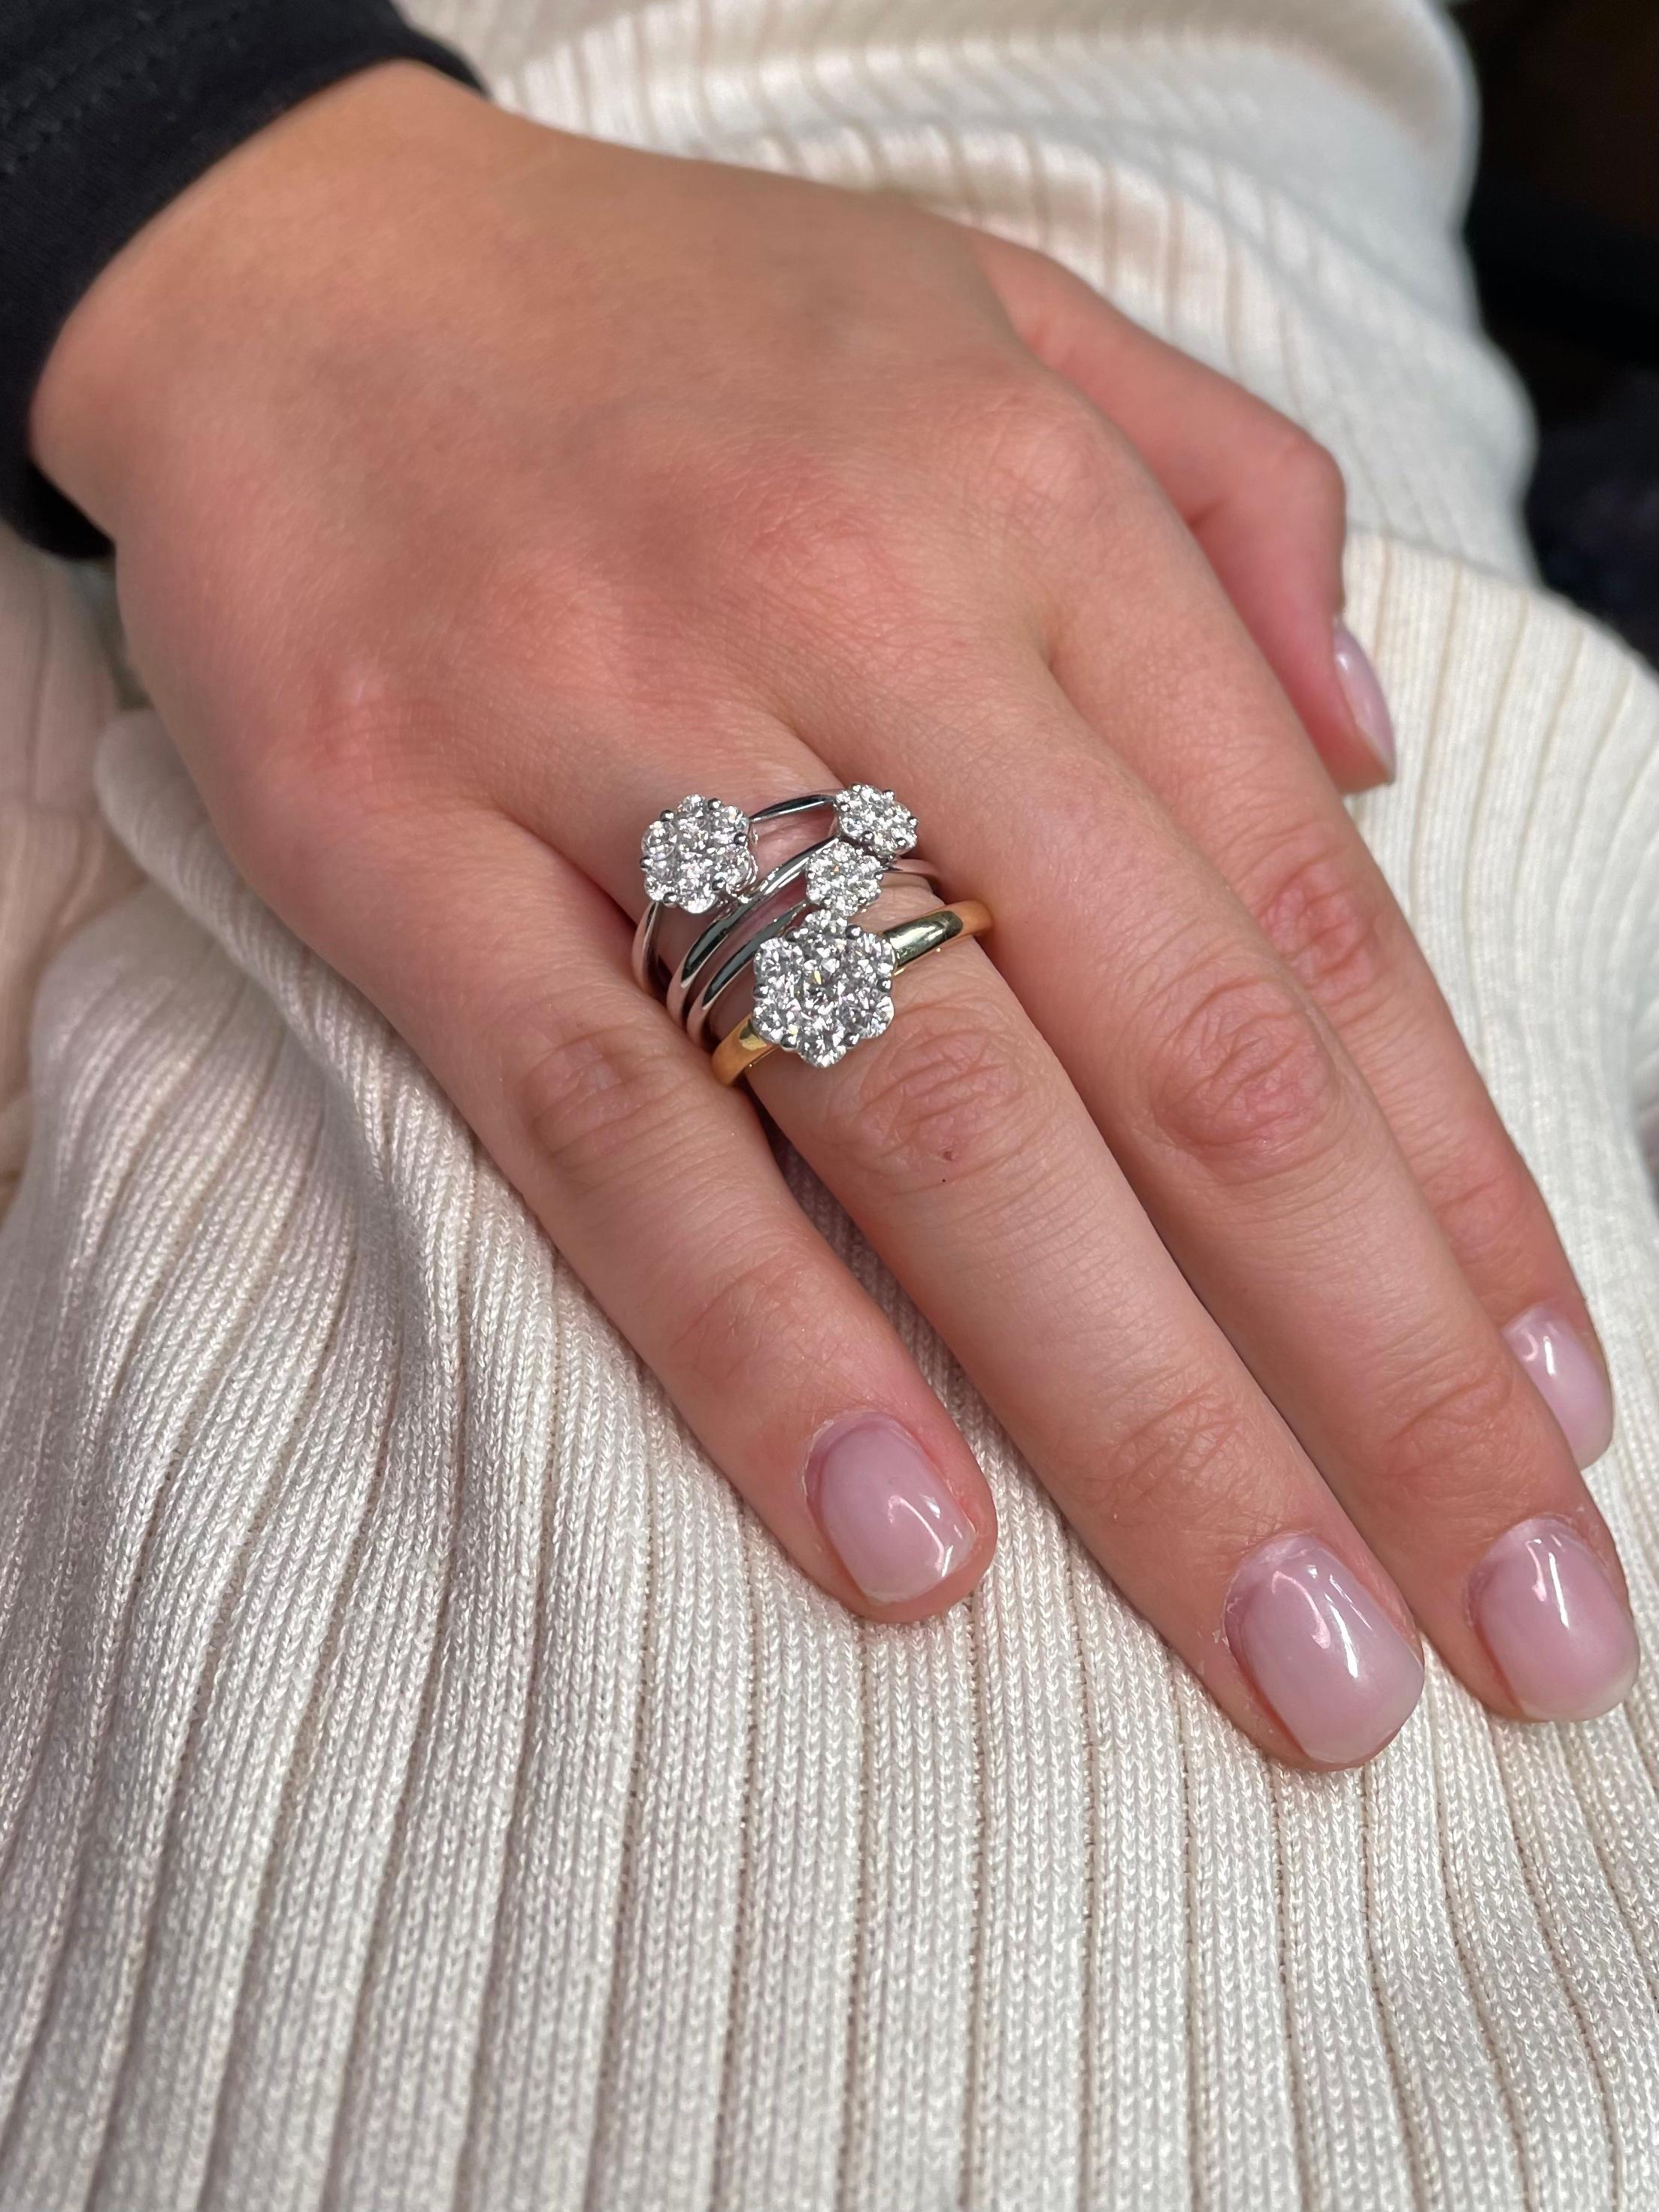 ntroducing our exquisite Natural Diamonds 1.00 carat 18 Karat White Gold Classic Engagement Ring, the epitome of luxury and elegance, perfect for marking a special anniversary or celebrating a milestone birthday.

Crafted with meticulous attention